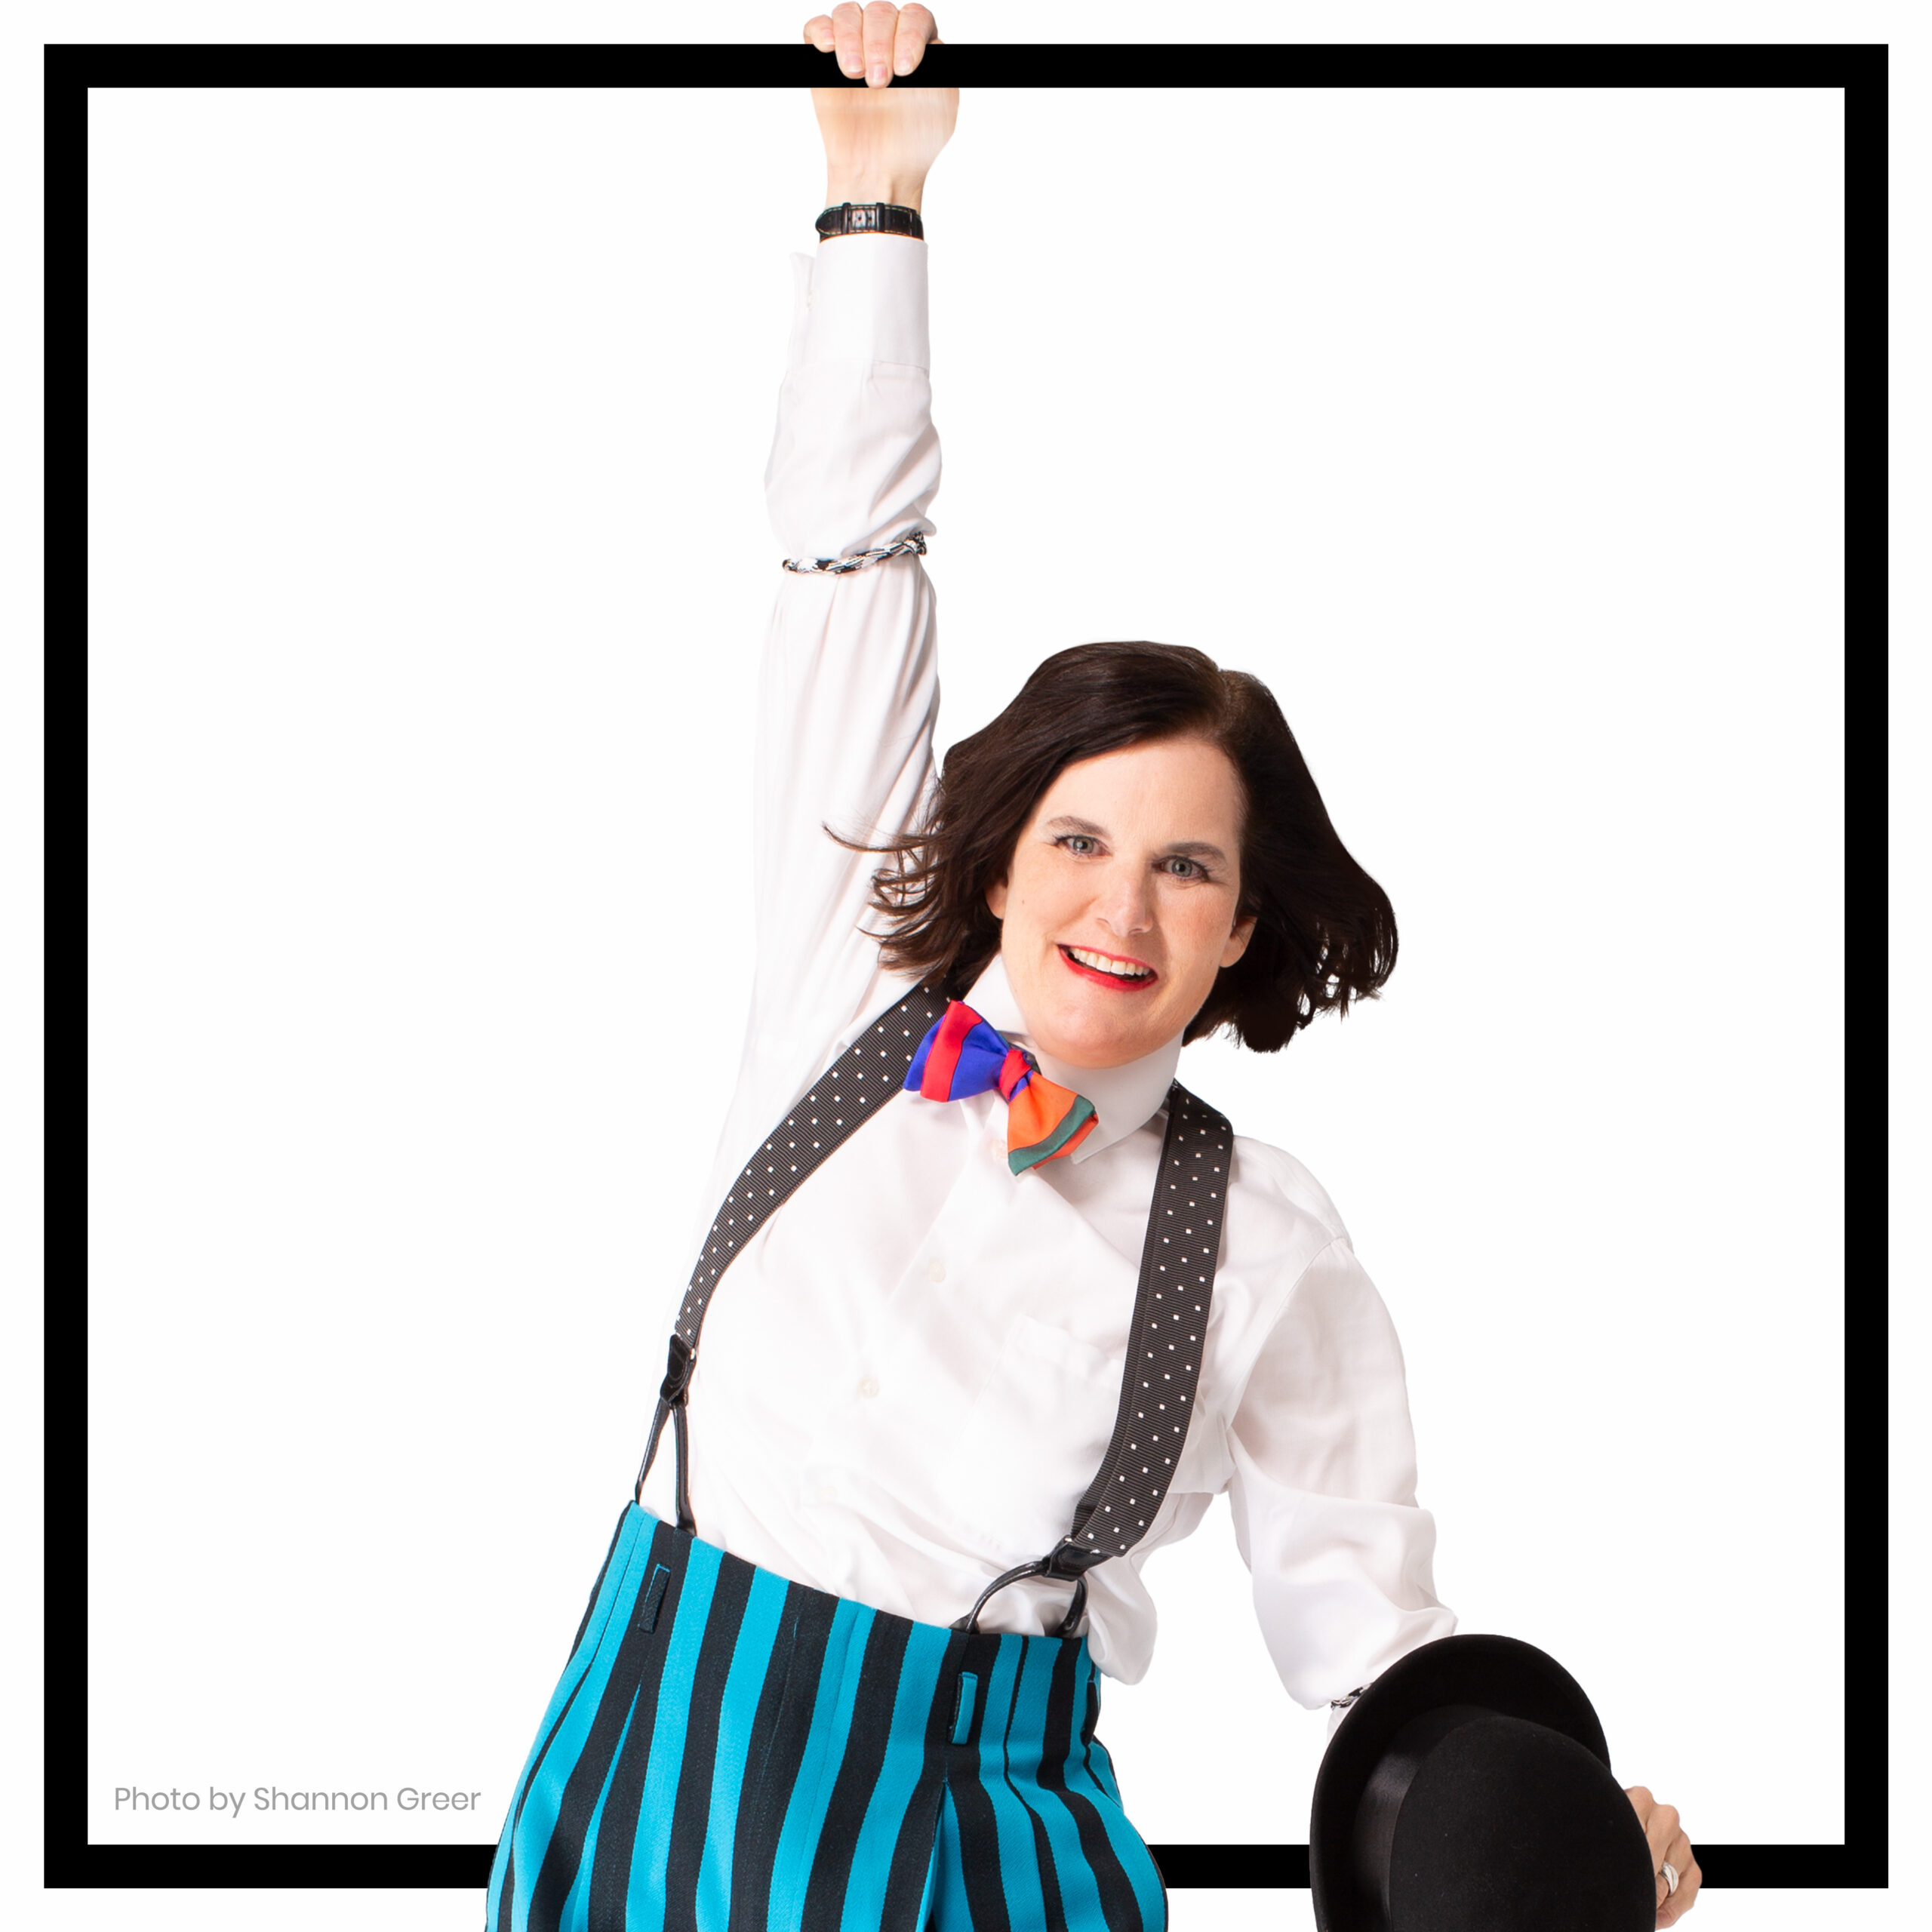 Paula Poundstone performs at Bay Street Theater on May 28. COURTESY BAY STREET THEATER